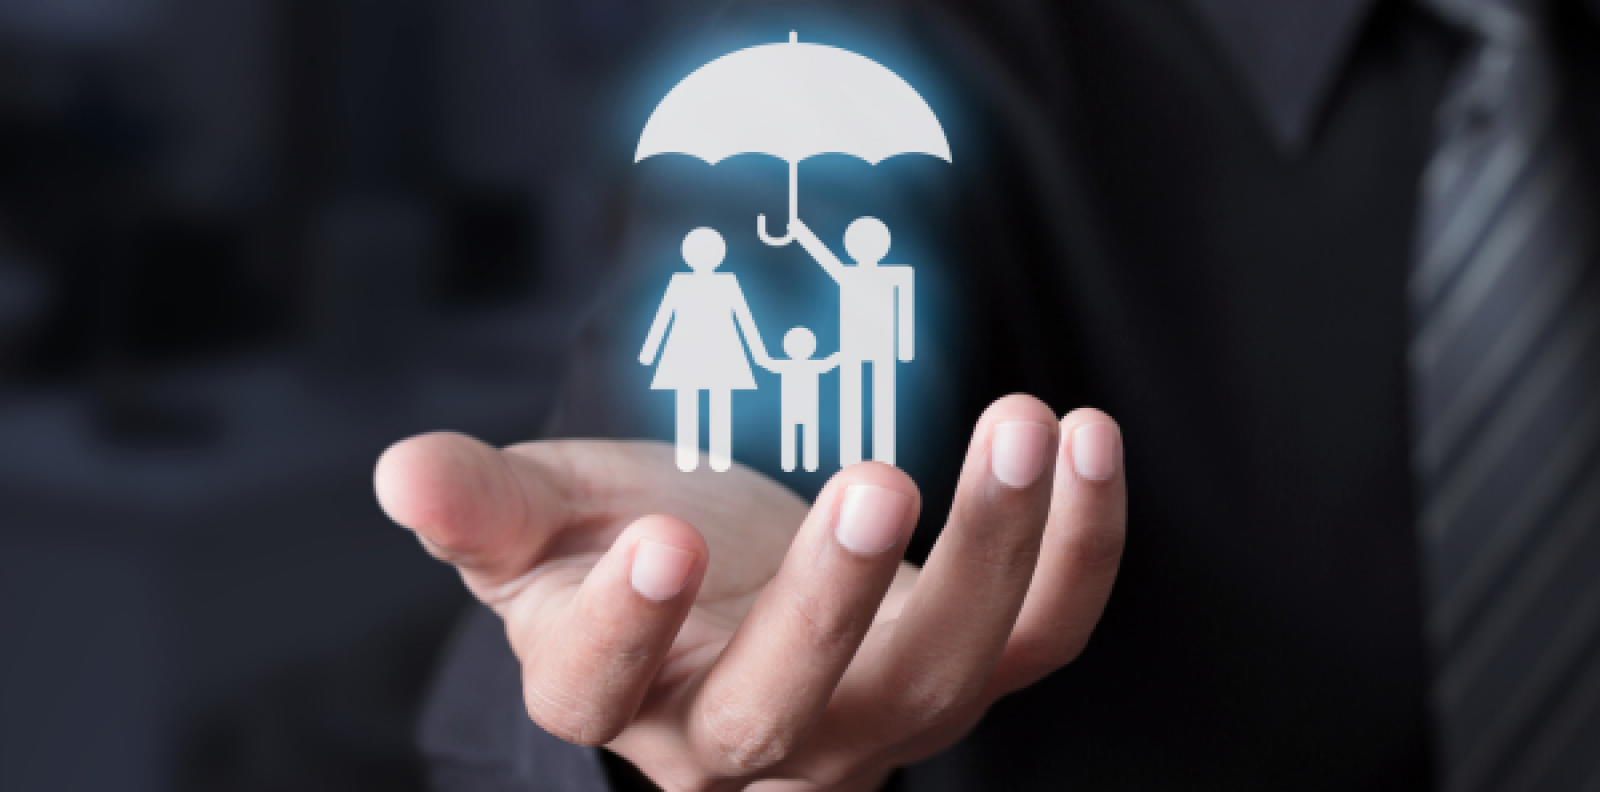 Consequences of not owning a life insurance